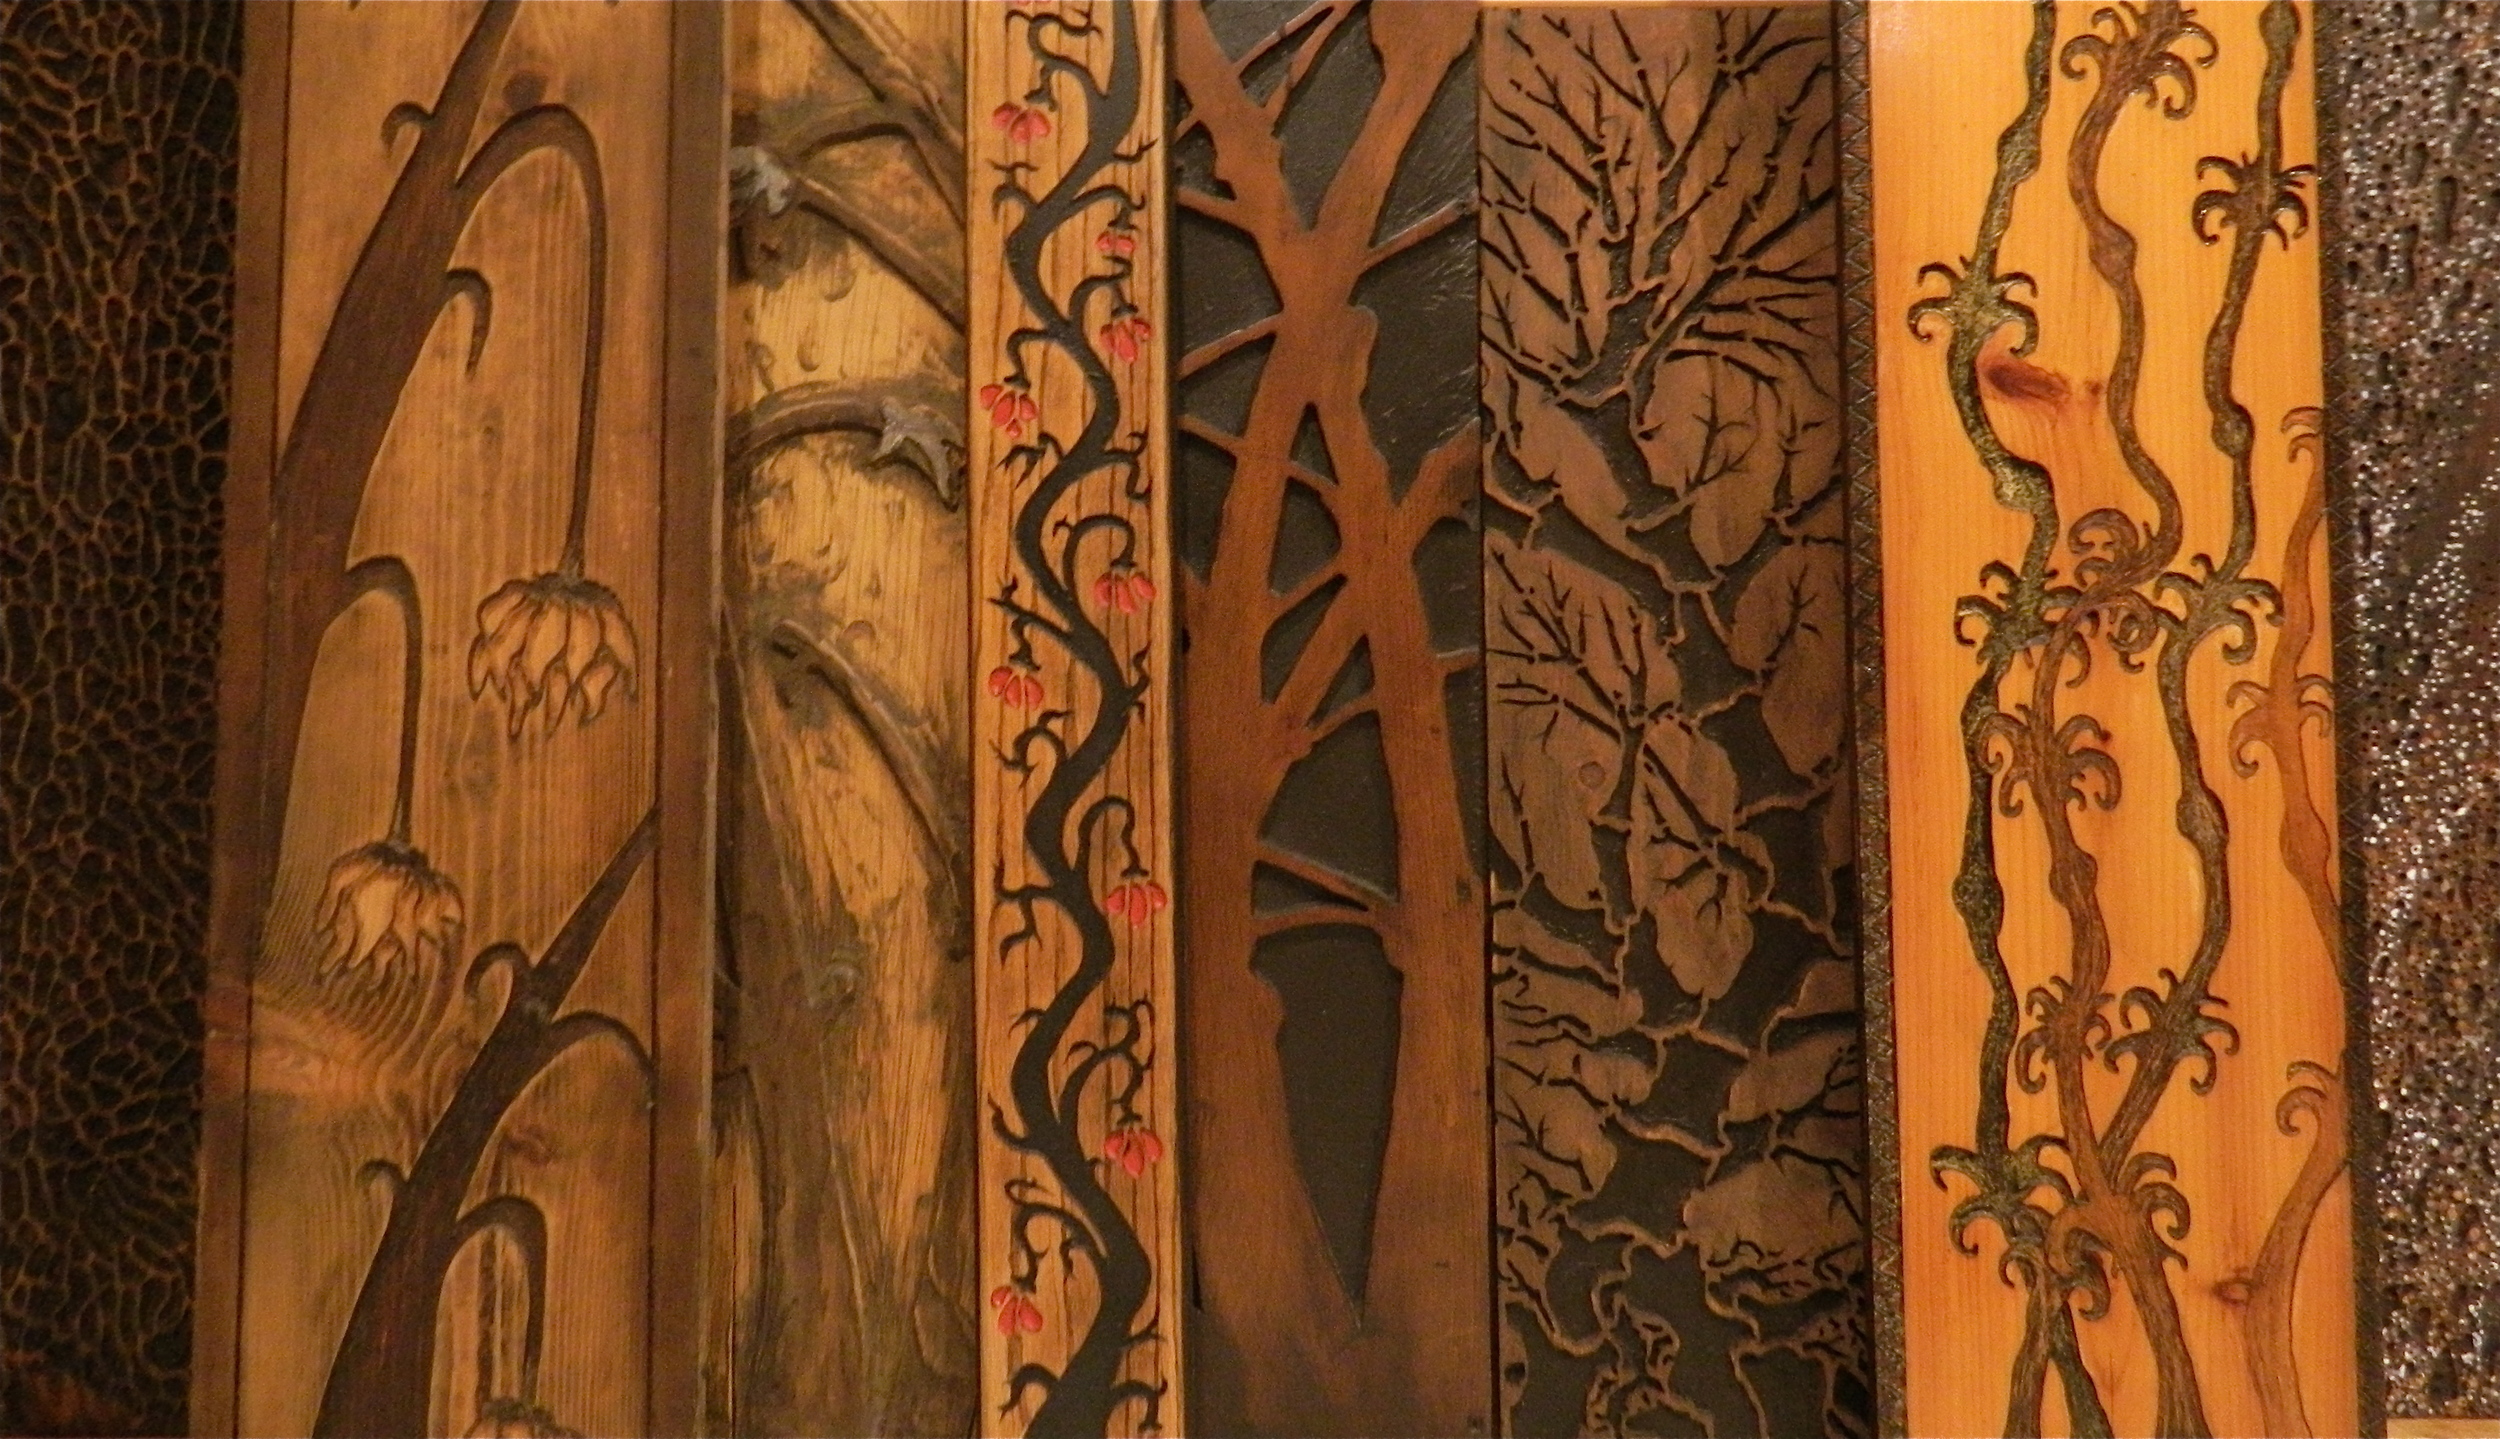 "VARIOUS WOODWORKS"